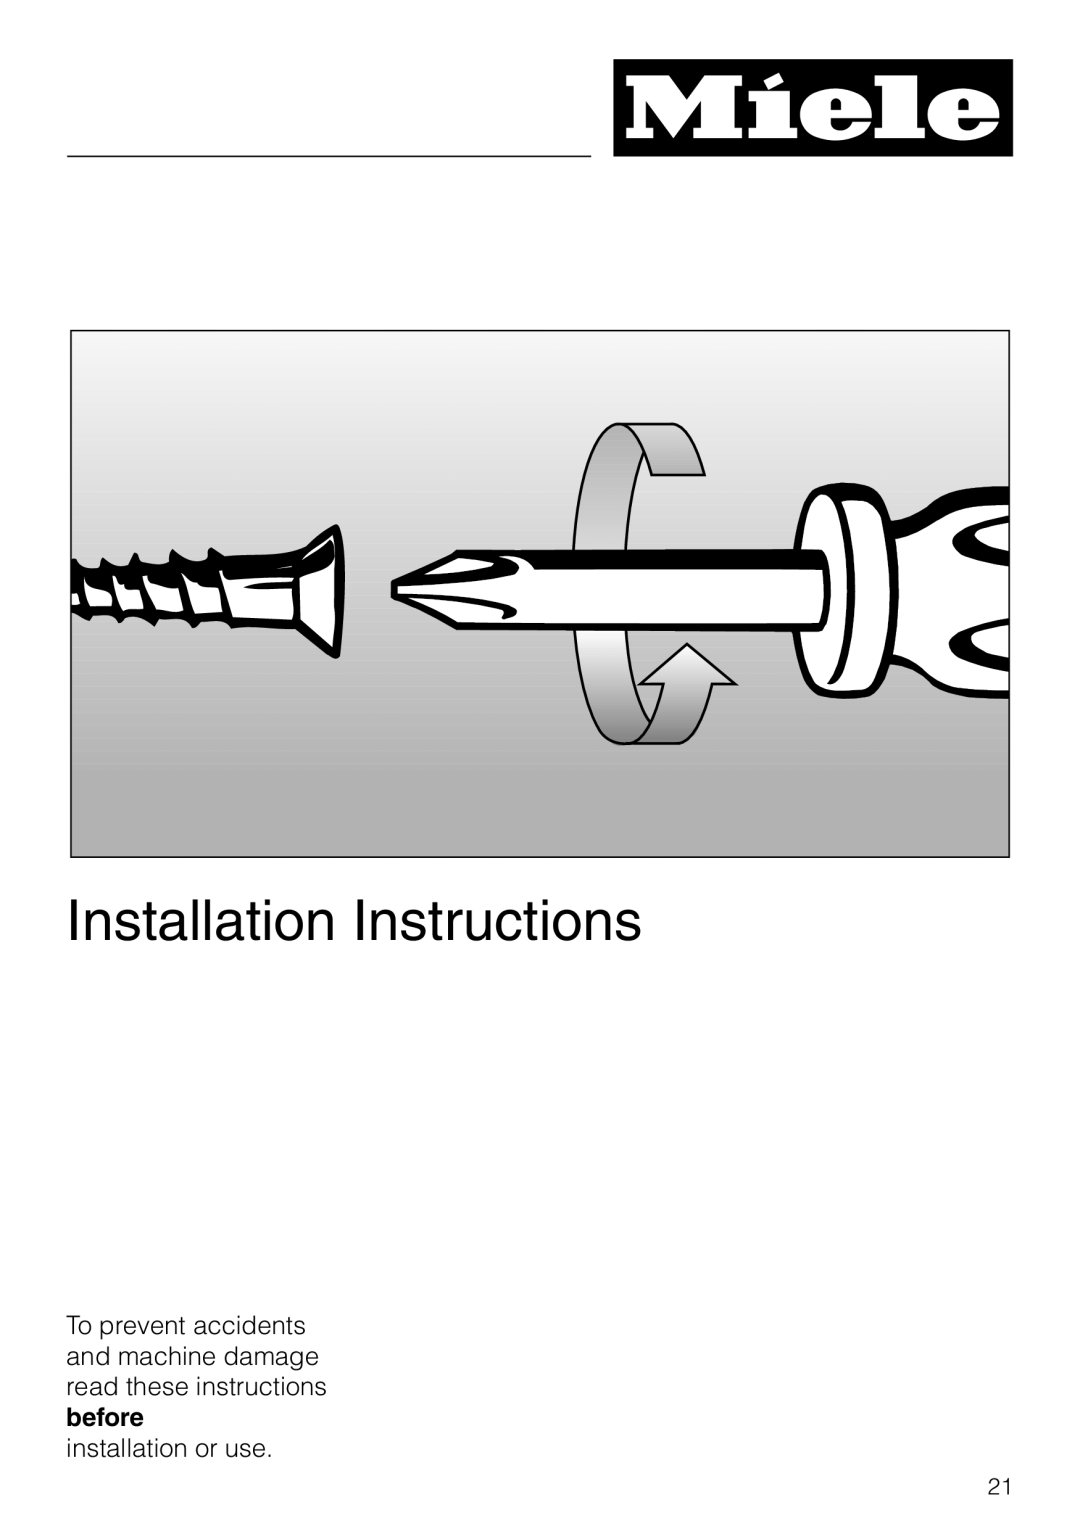 Miele KM 391 manual Installation Instructions, installation or use 